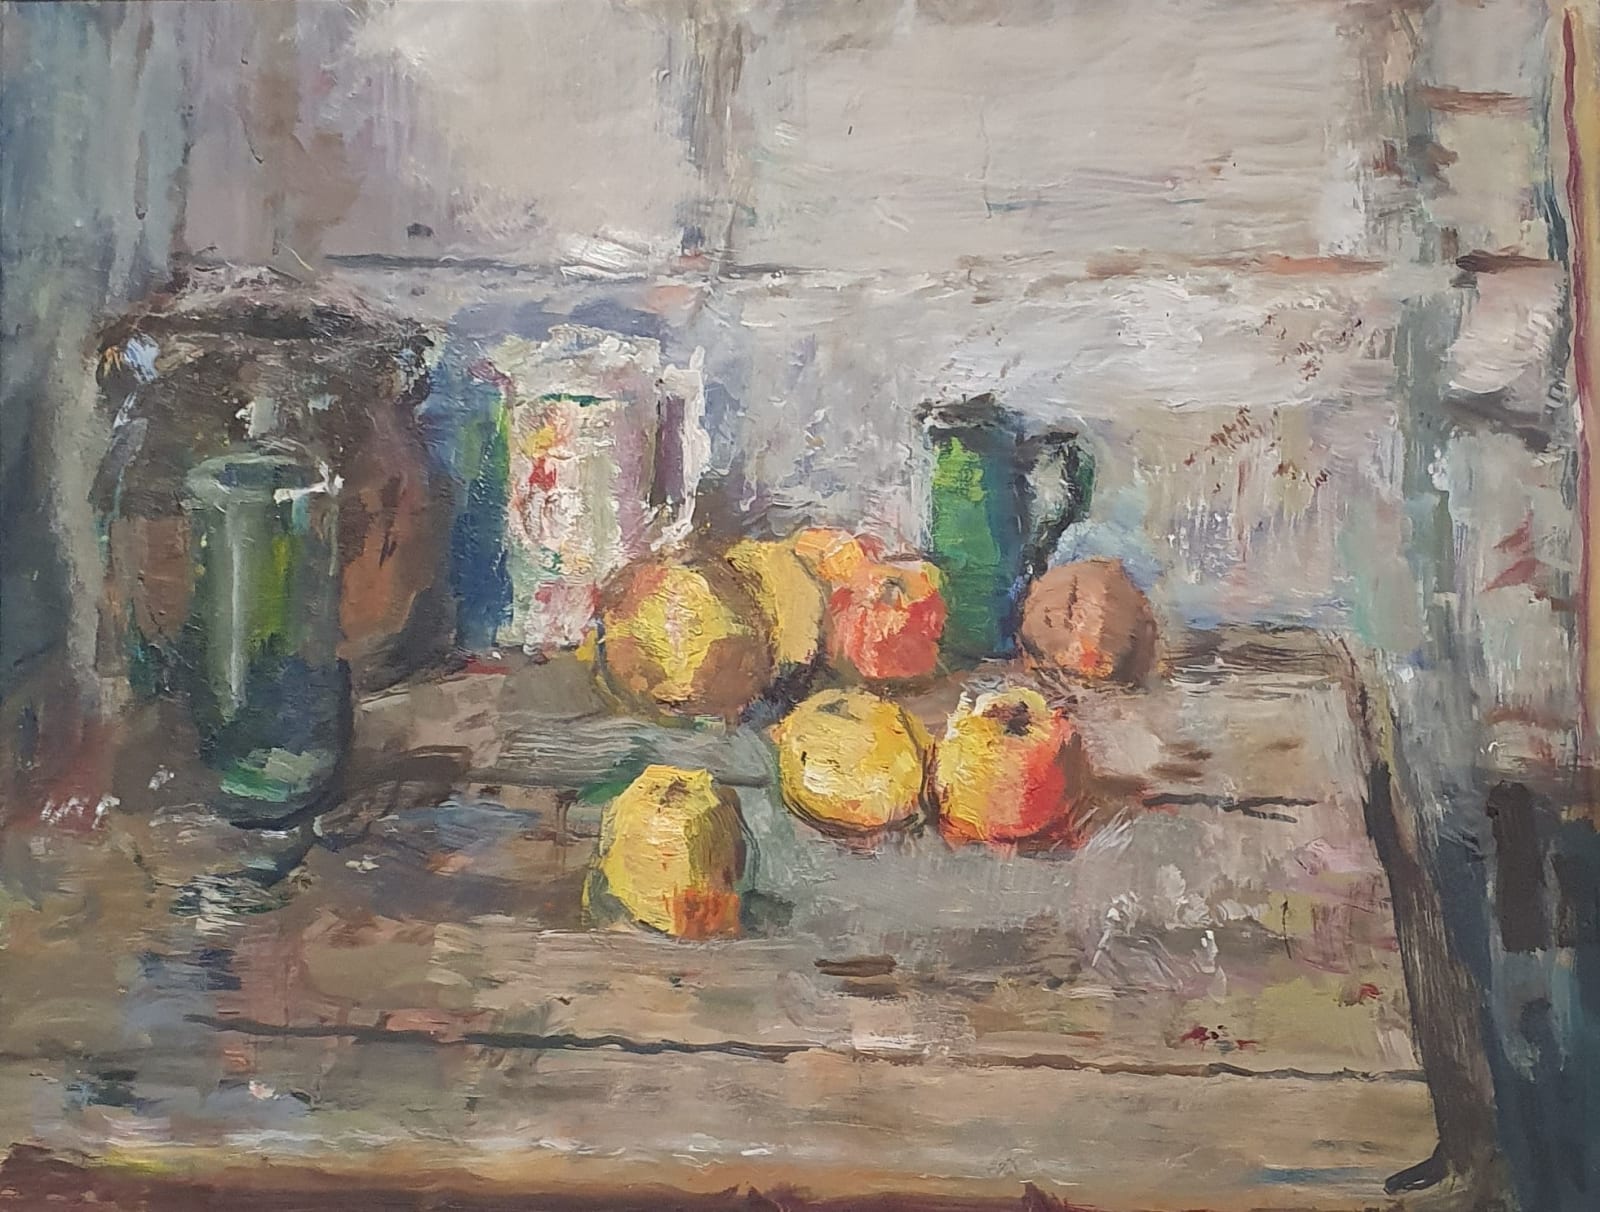 ANTHONY EYTON, Apples on a Table, early Evening